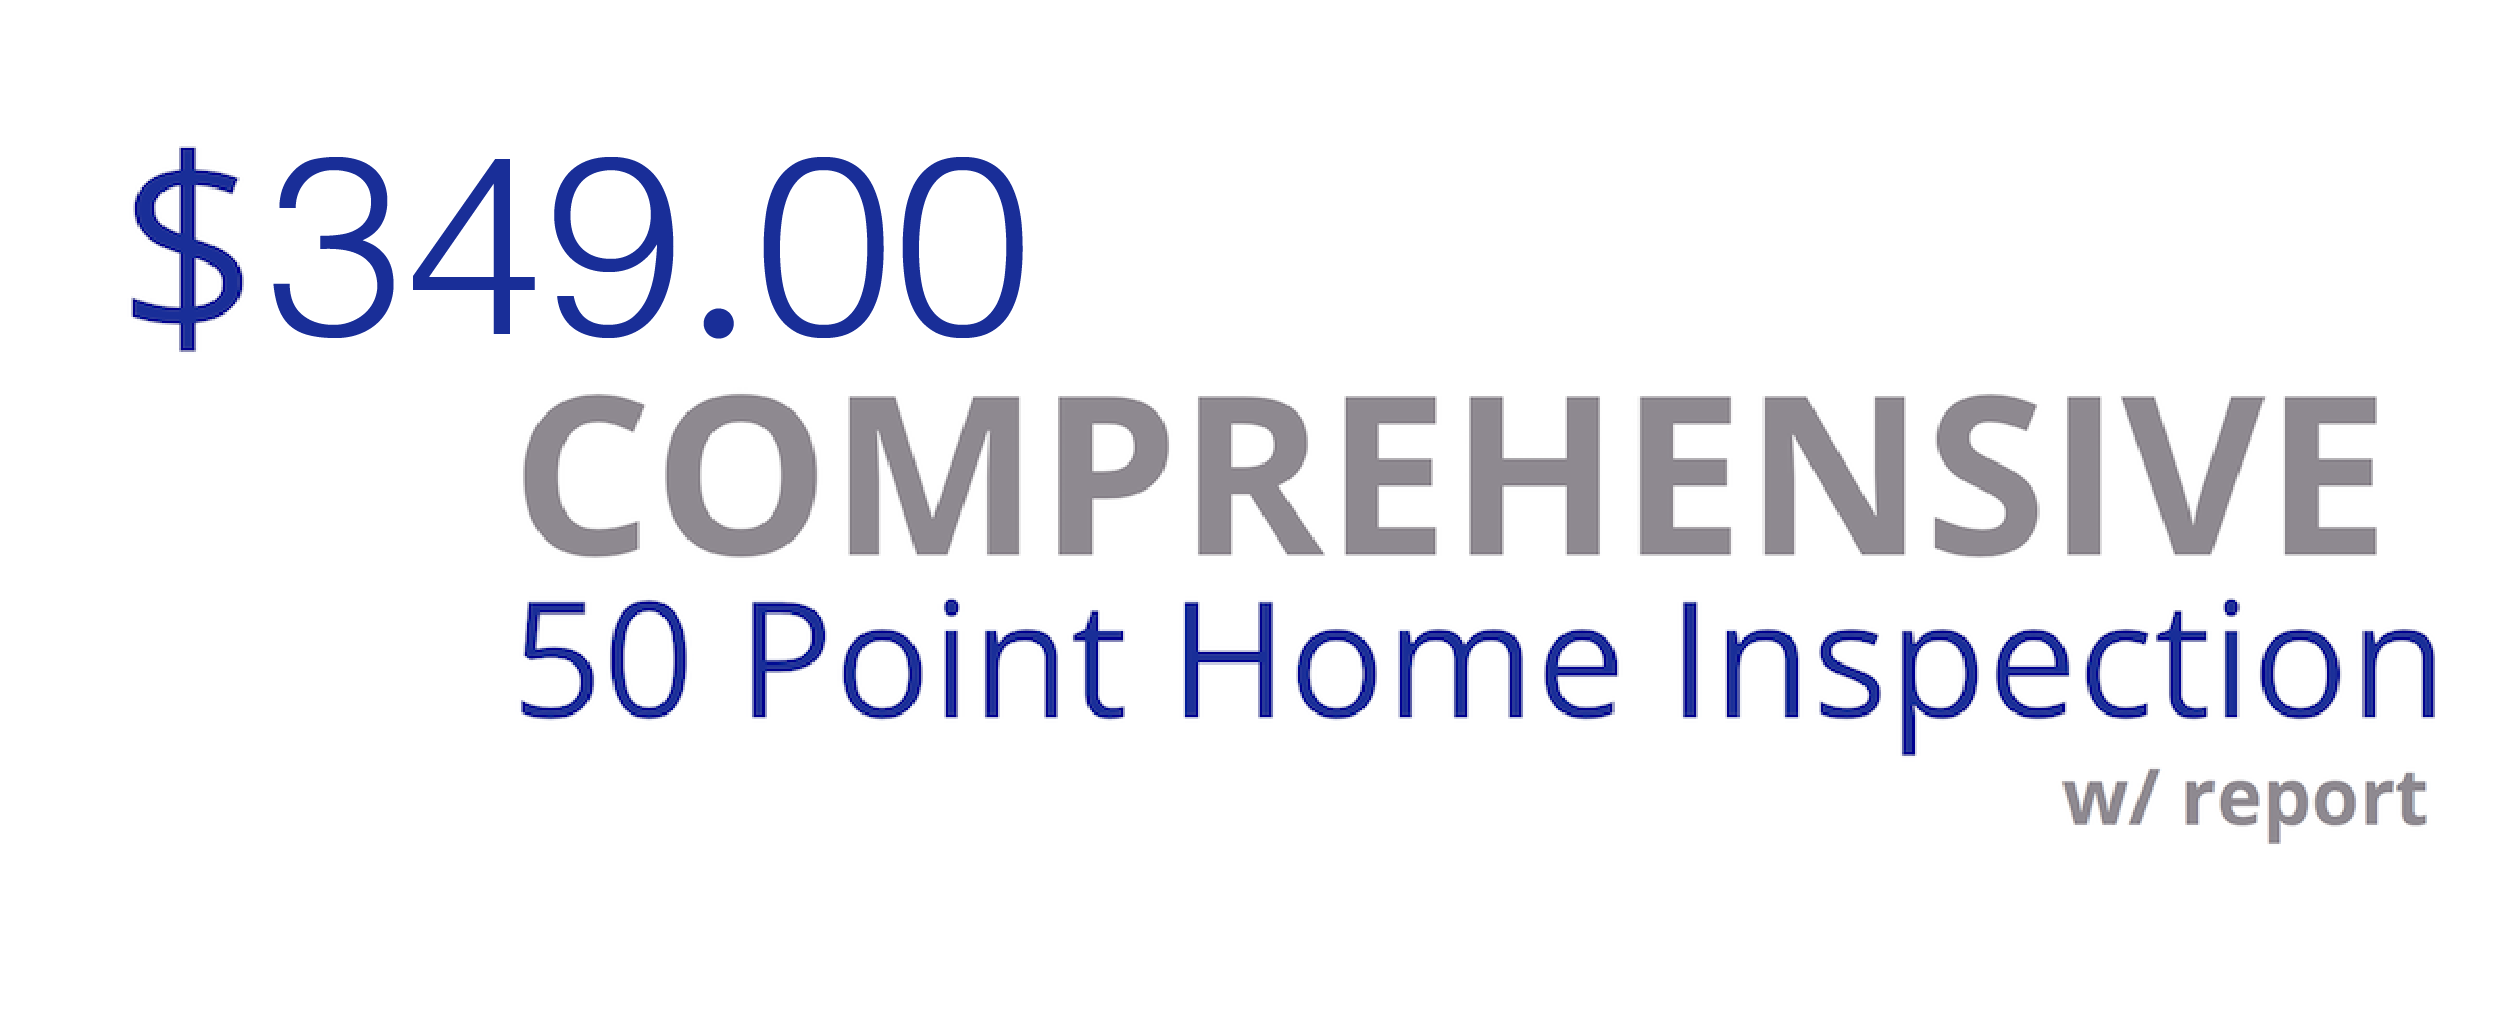 $349 Comprehensive 50 Point Home Inspection w/ Report